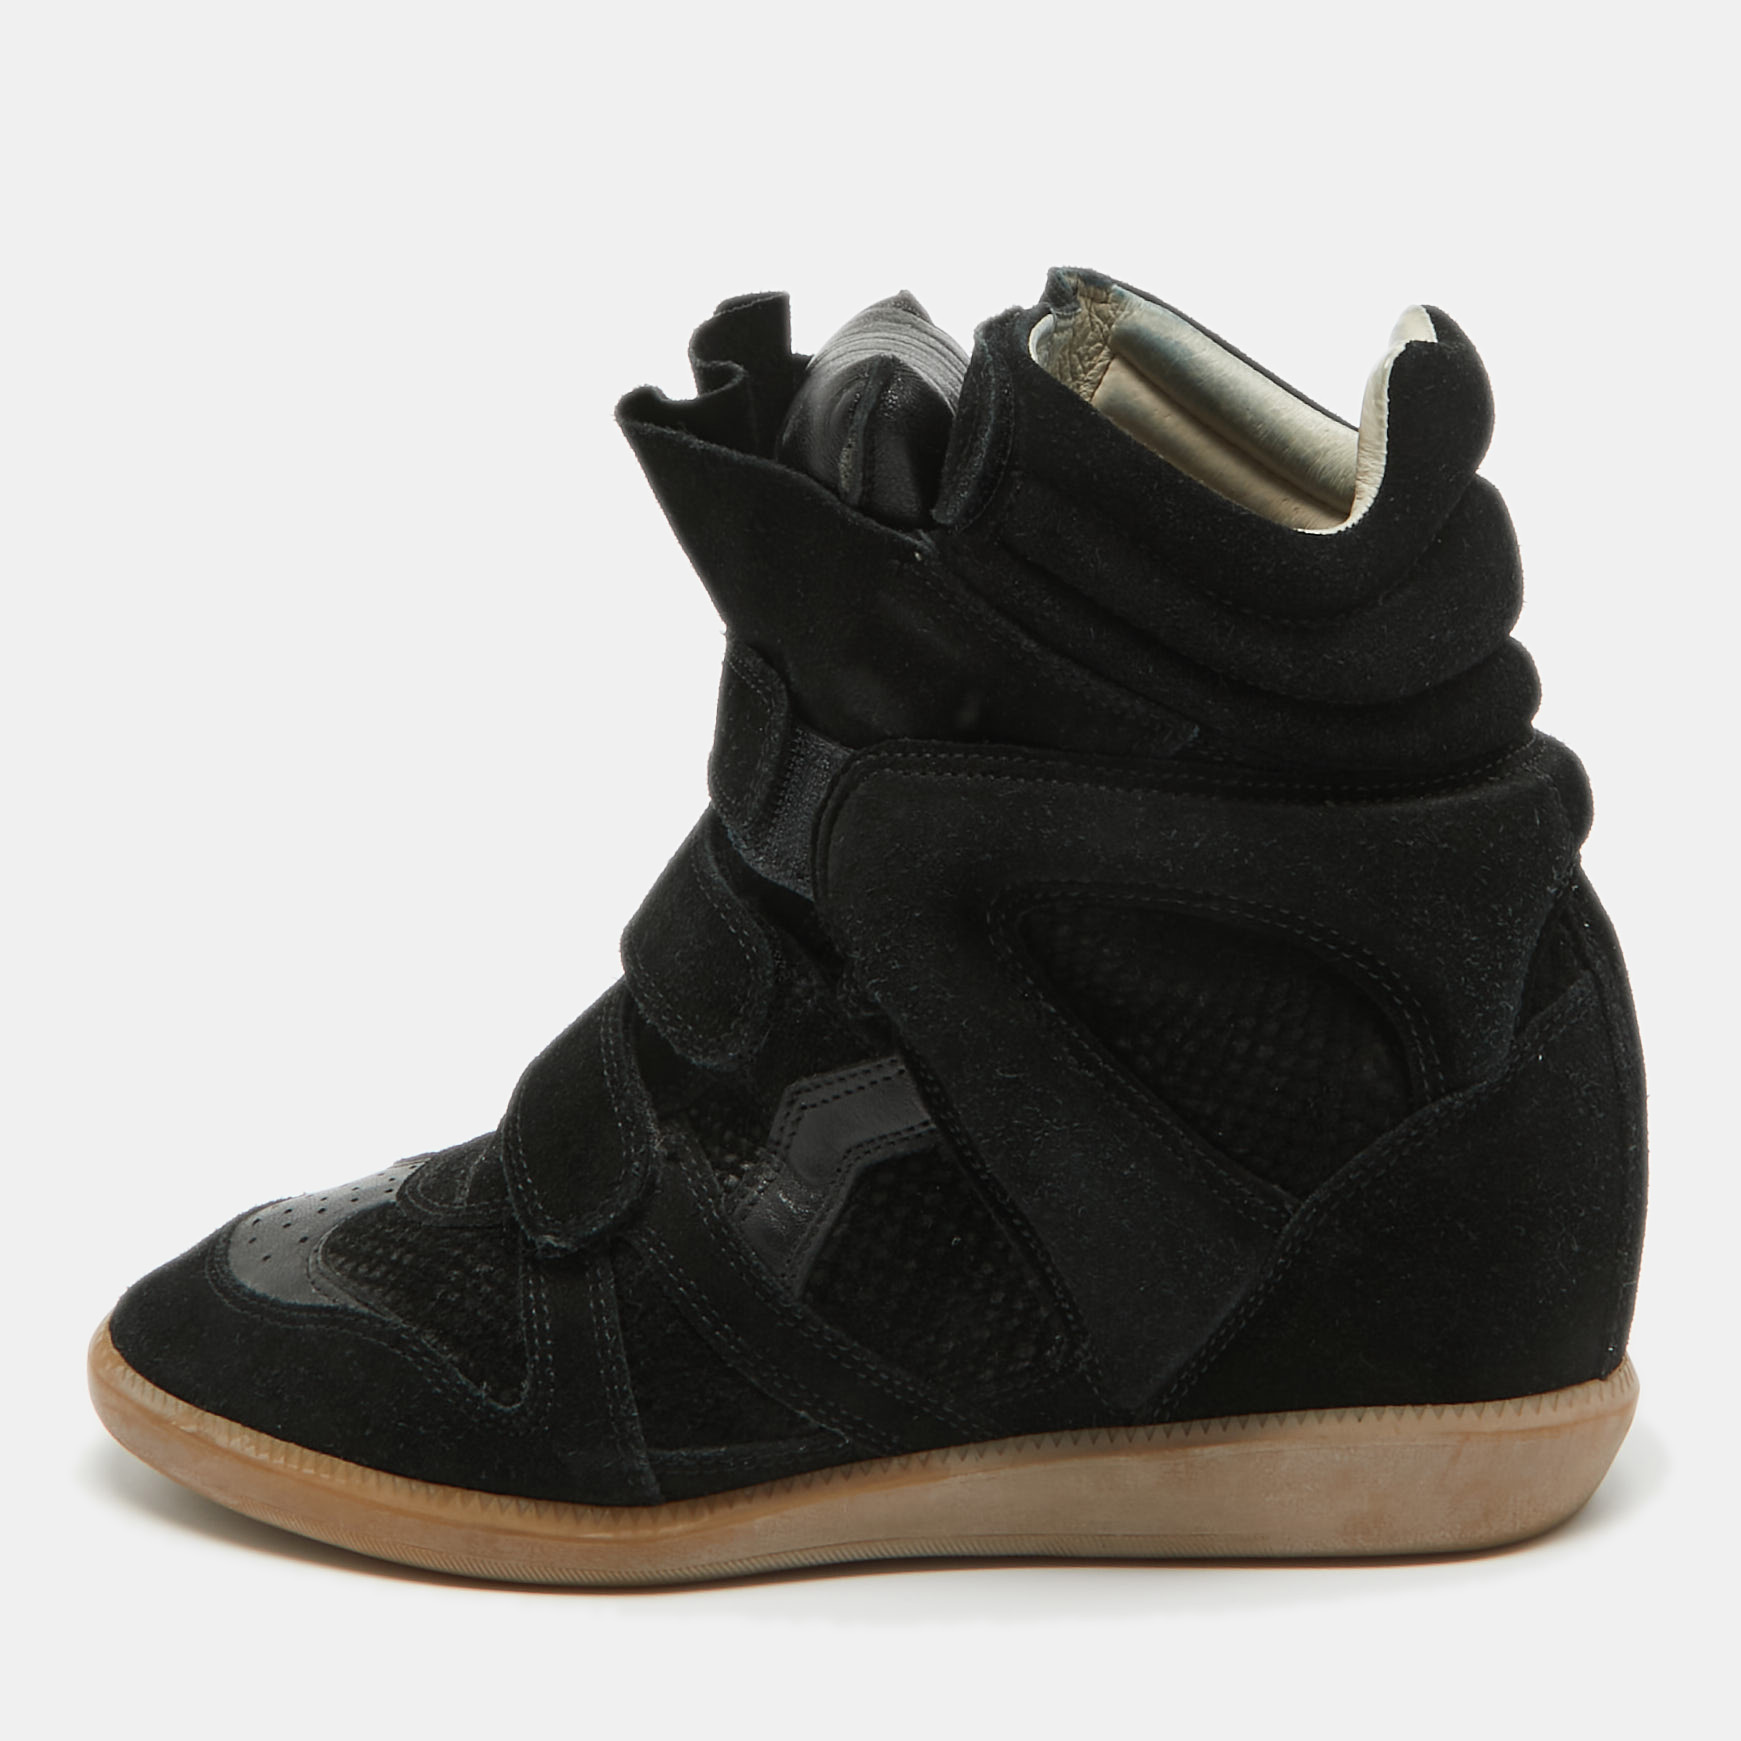 Isabel marant black leather and suede over basket wedge high top sneakers size 39